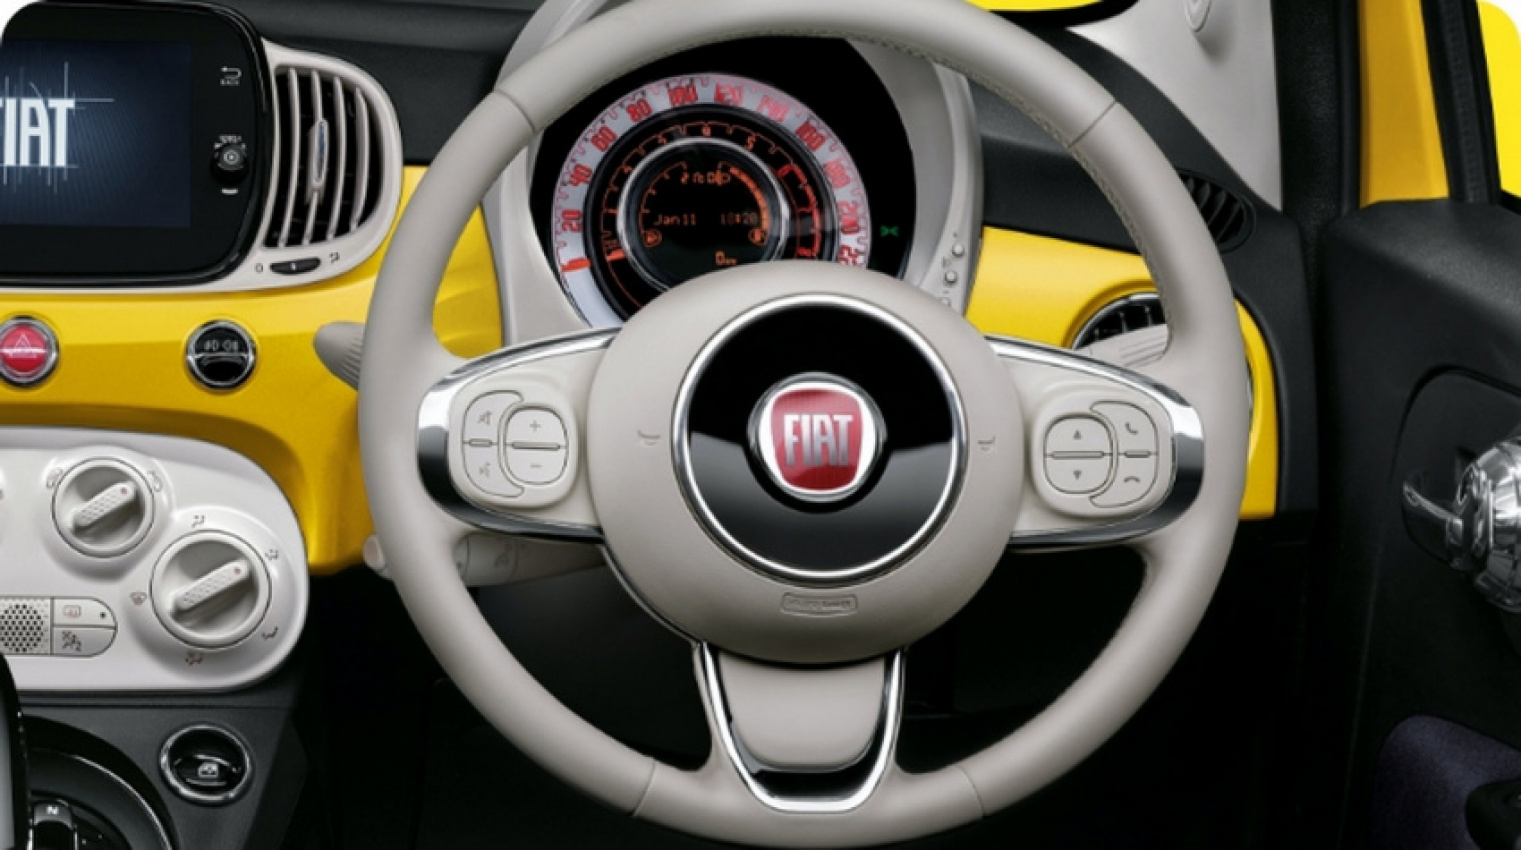 autos, cars, fiat, news, fiat 500, japan, new cars, the good-old fiat 500 gets a giallissima limited edition in japan